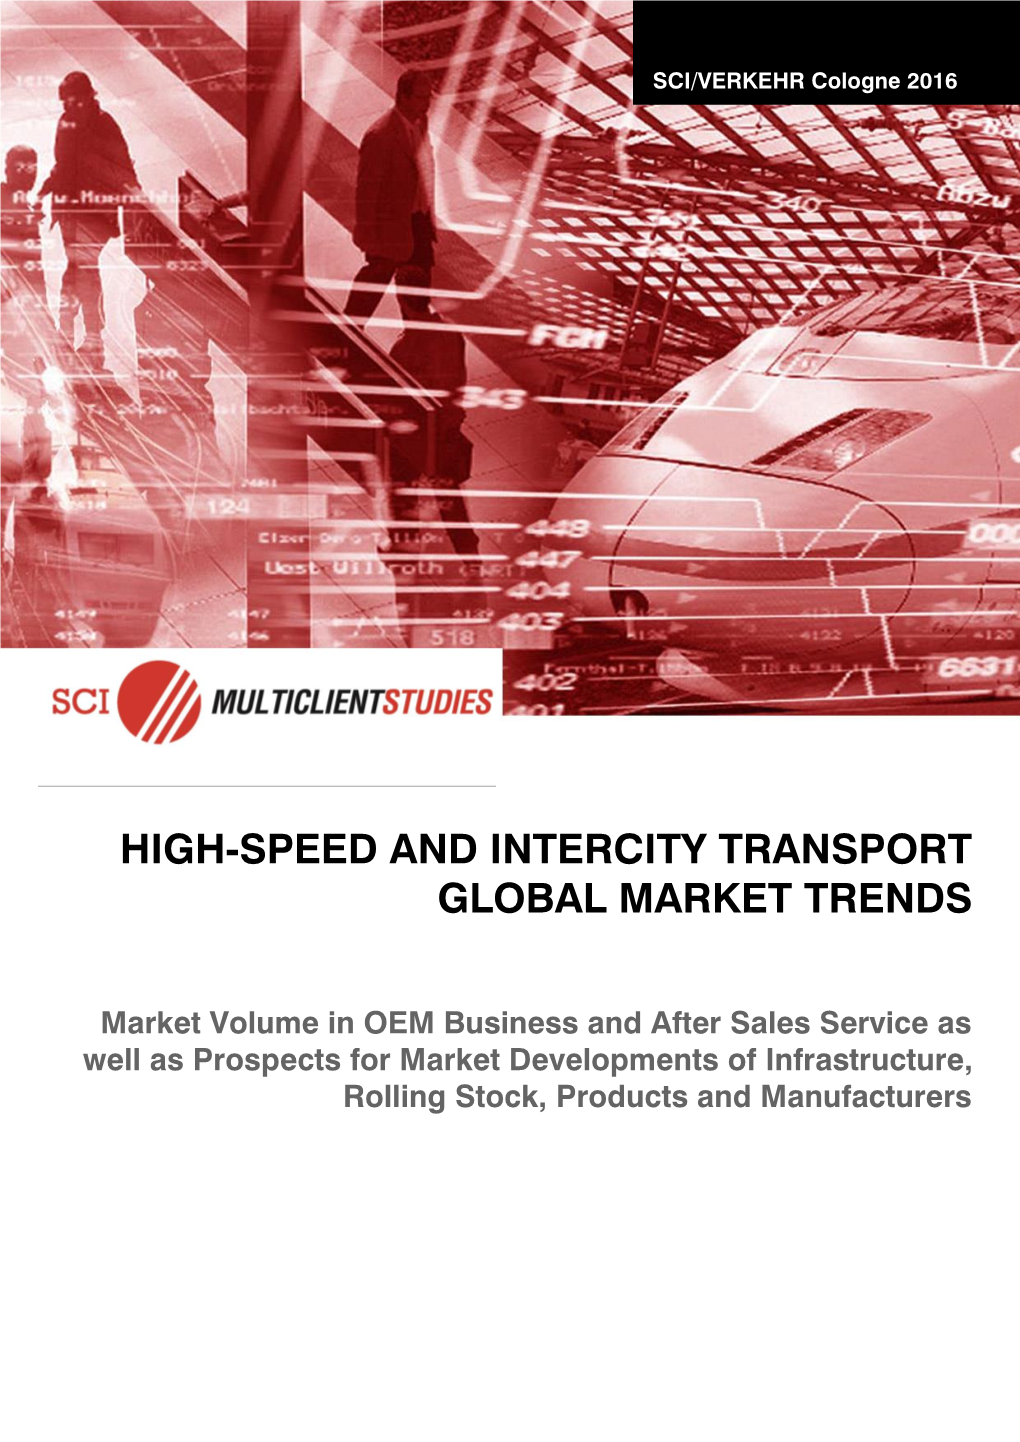 High-Speed and Intercity Transport Global Market Trends